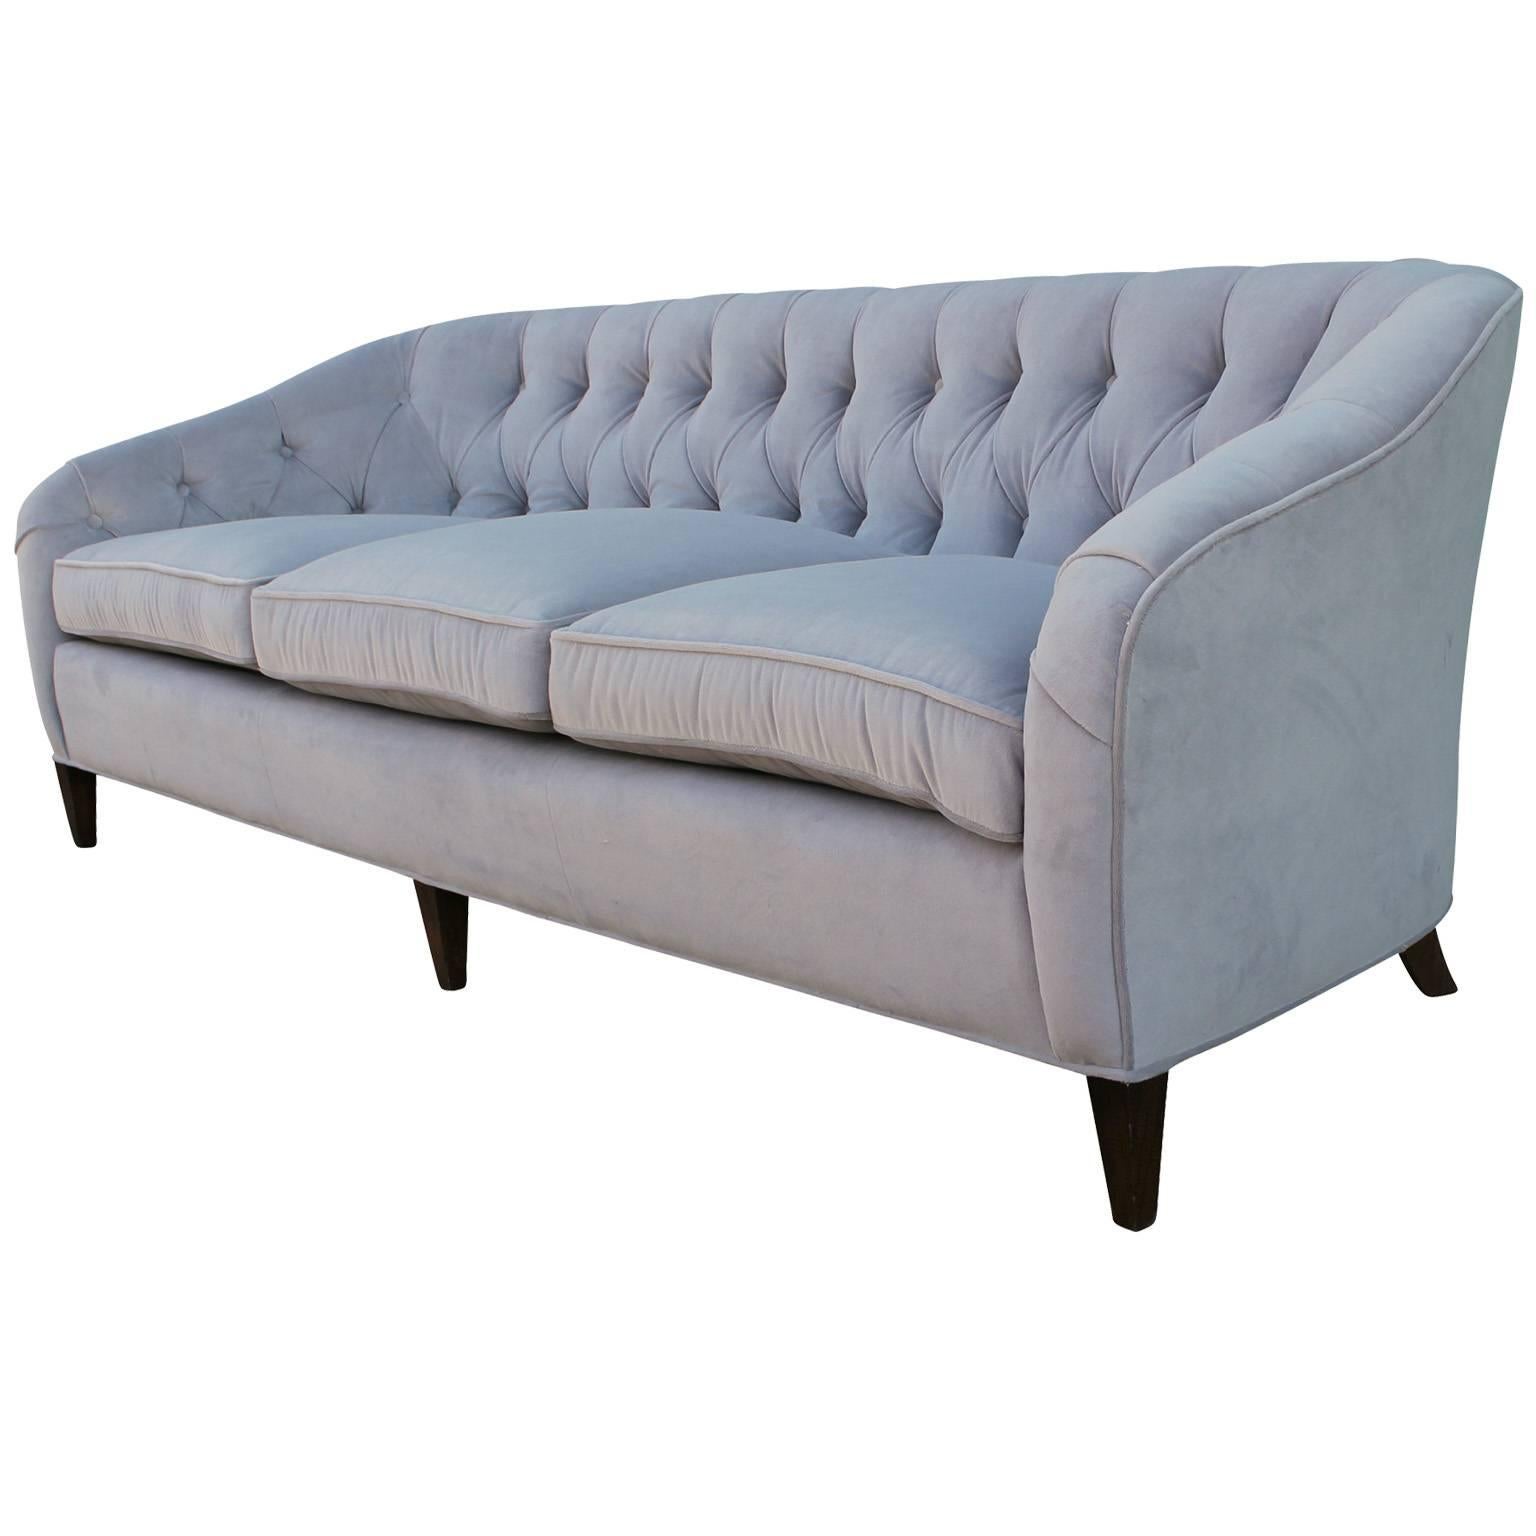 Glamorous and comfortable sofa by Baker Furniture. Sumptuous and comfortable cushions. Tufted sofa is freshly upholstered in a soft pale grey velvet mohair. Dark walnut legs finish the piece.